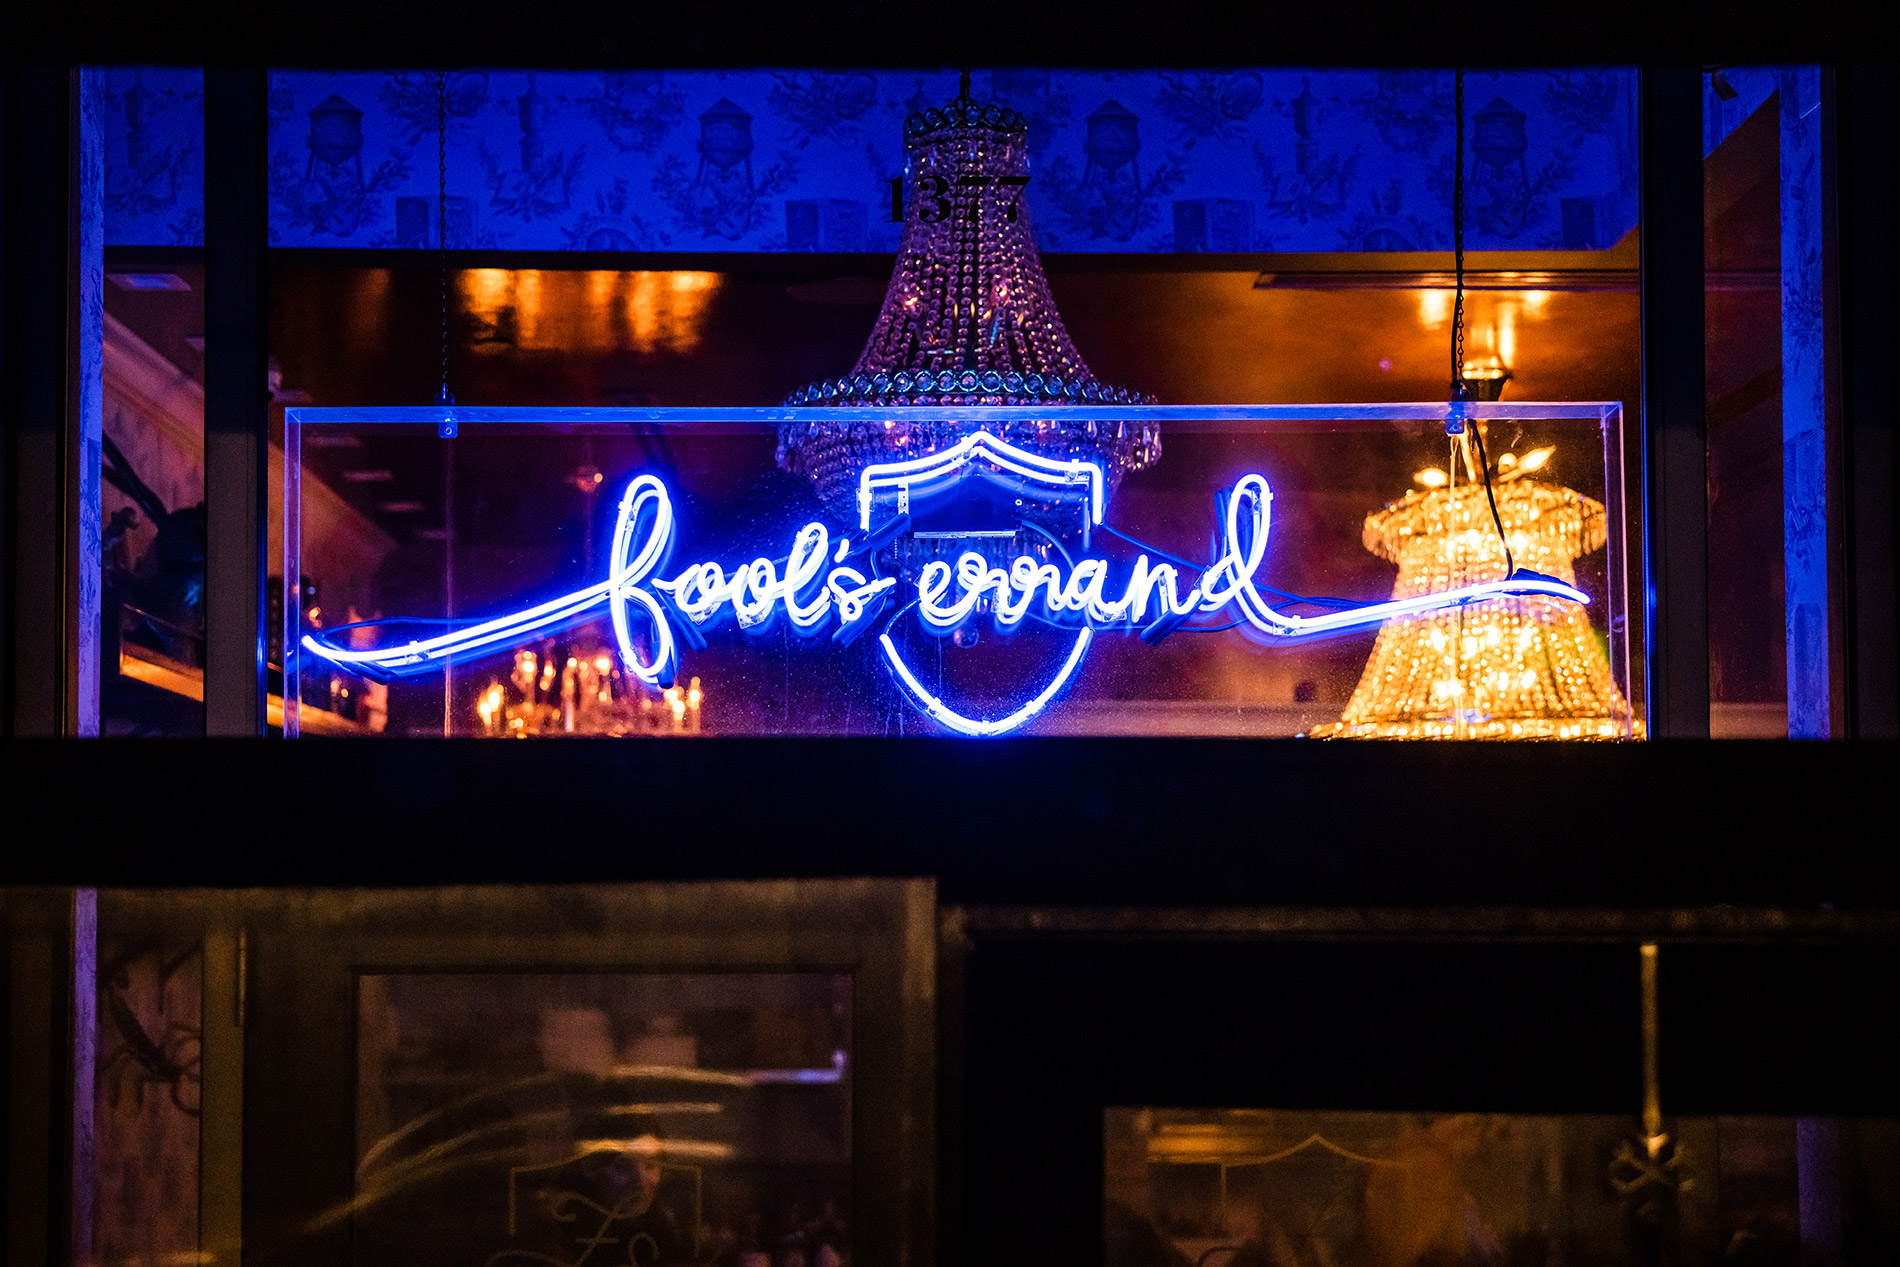 A blue neon side reads Fool's Errand in cursive writing.